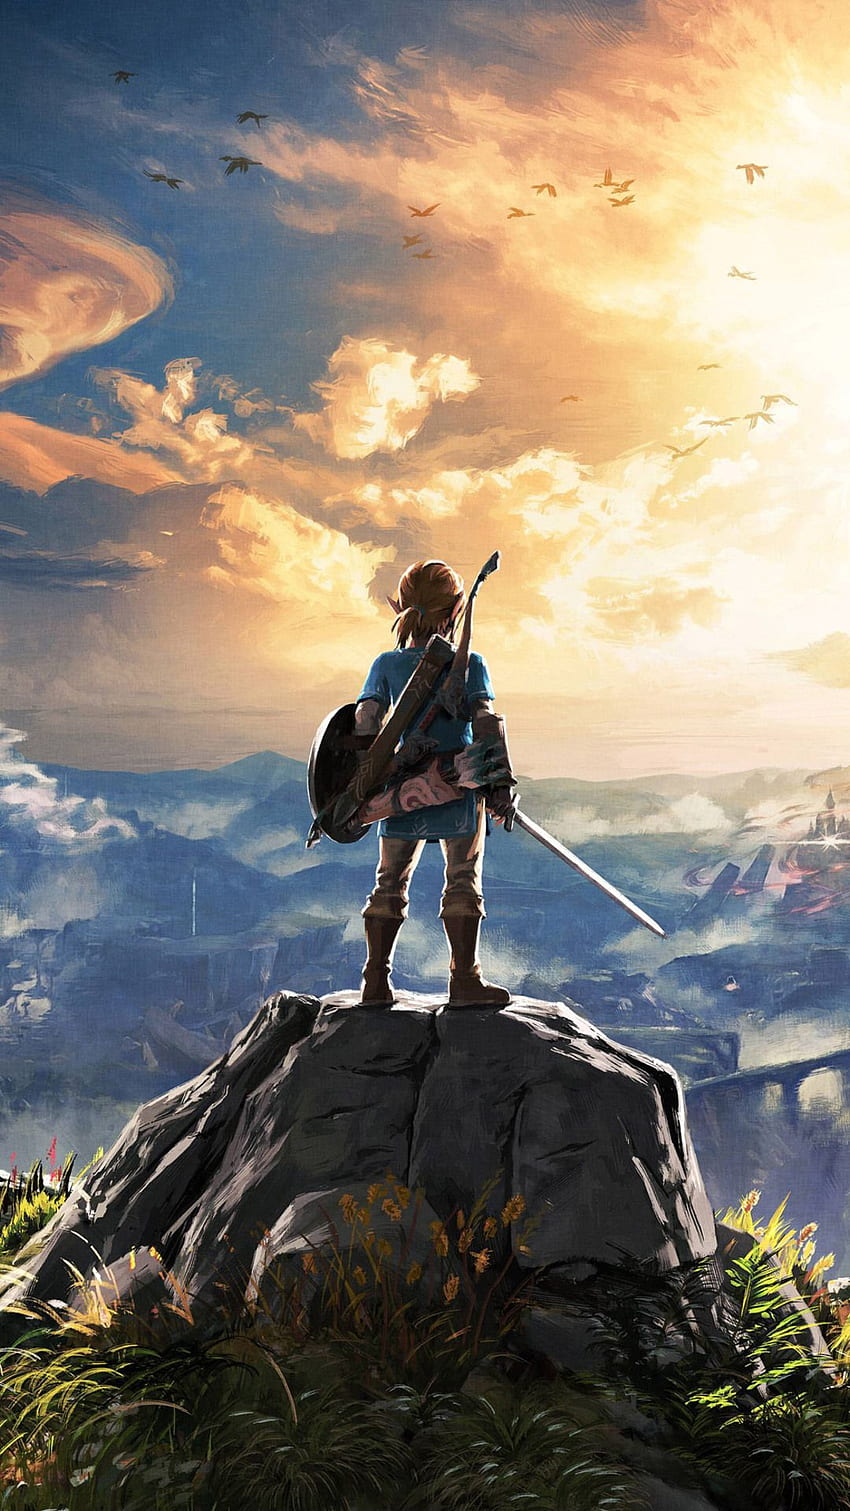 Wallpaper ID 392791  Video Game The Legend of Zelda Breath of the Wild Phone  Wallpaper  1080x1920 free download